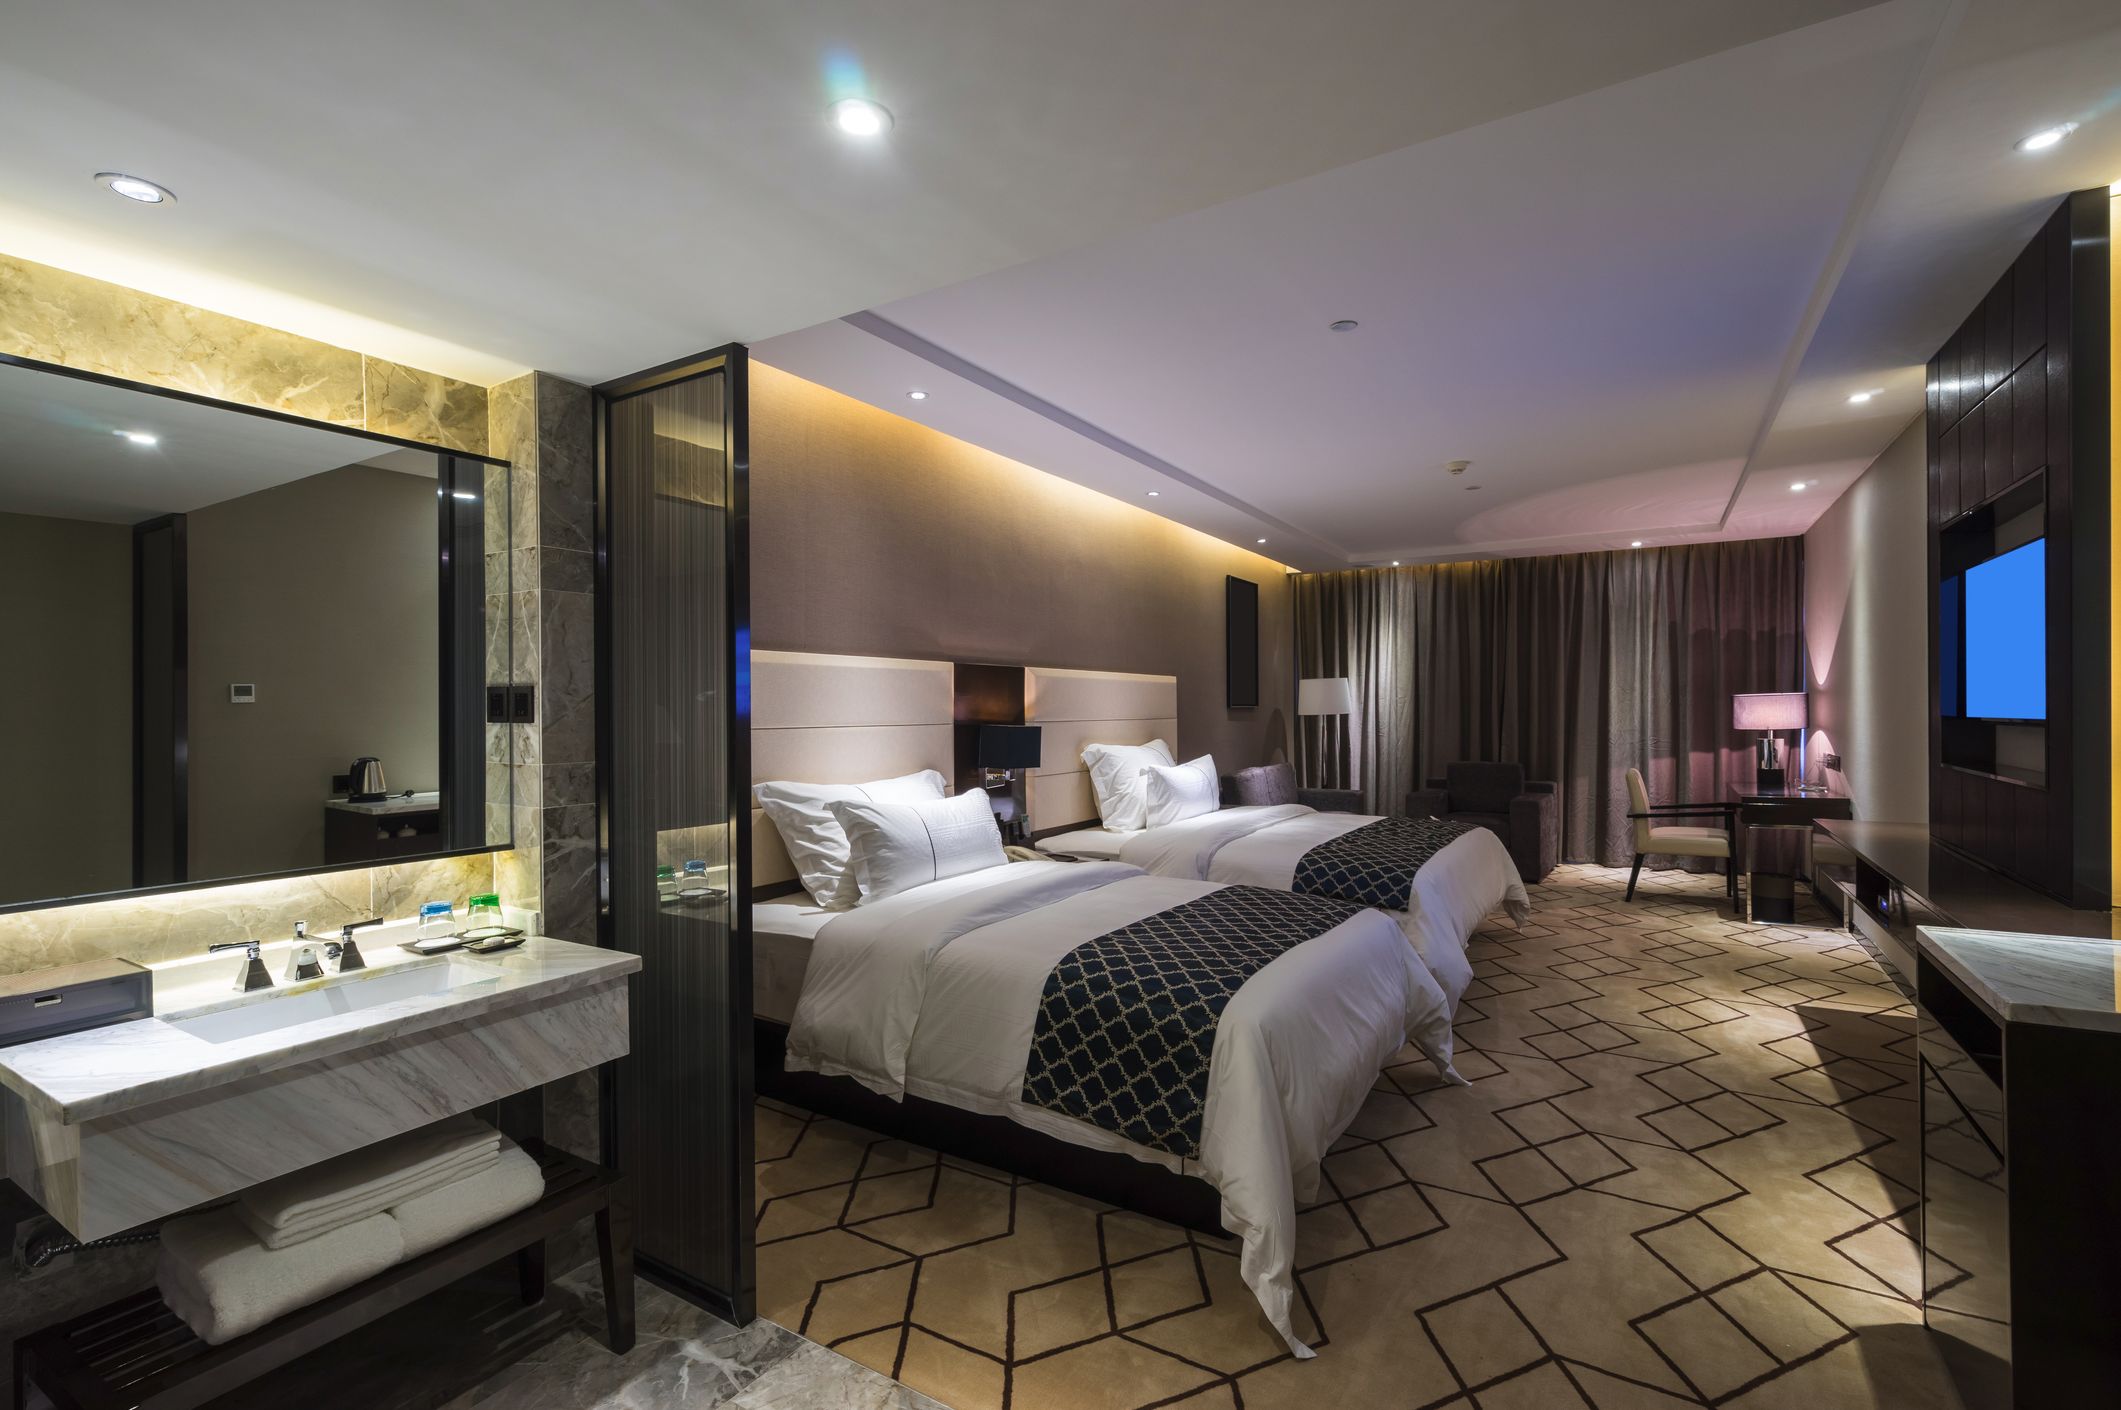 7 Tips for Designing a Hotel Room